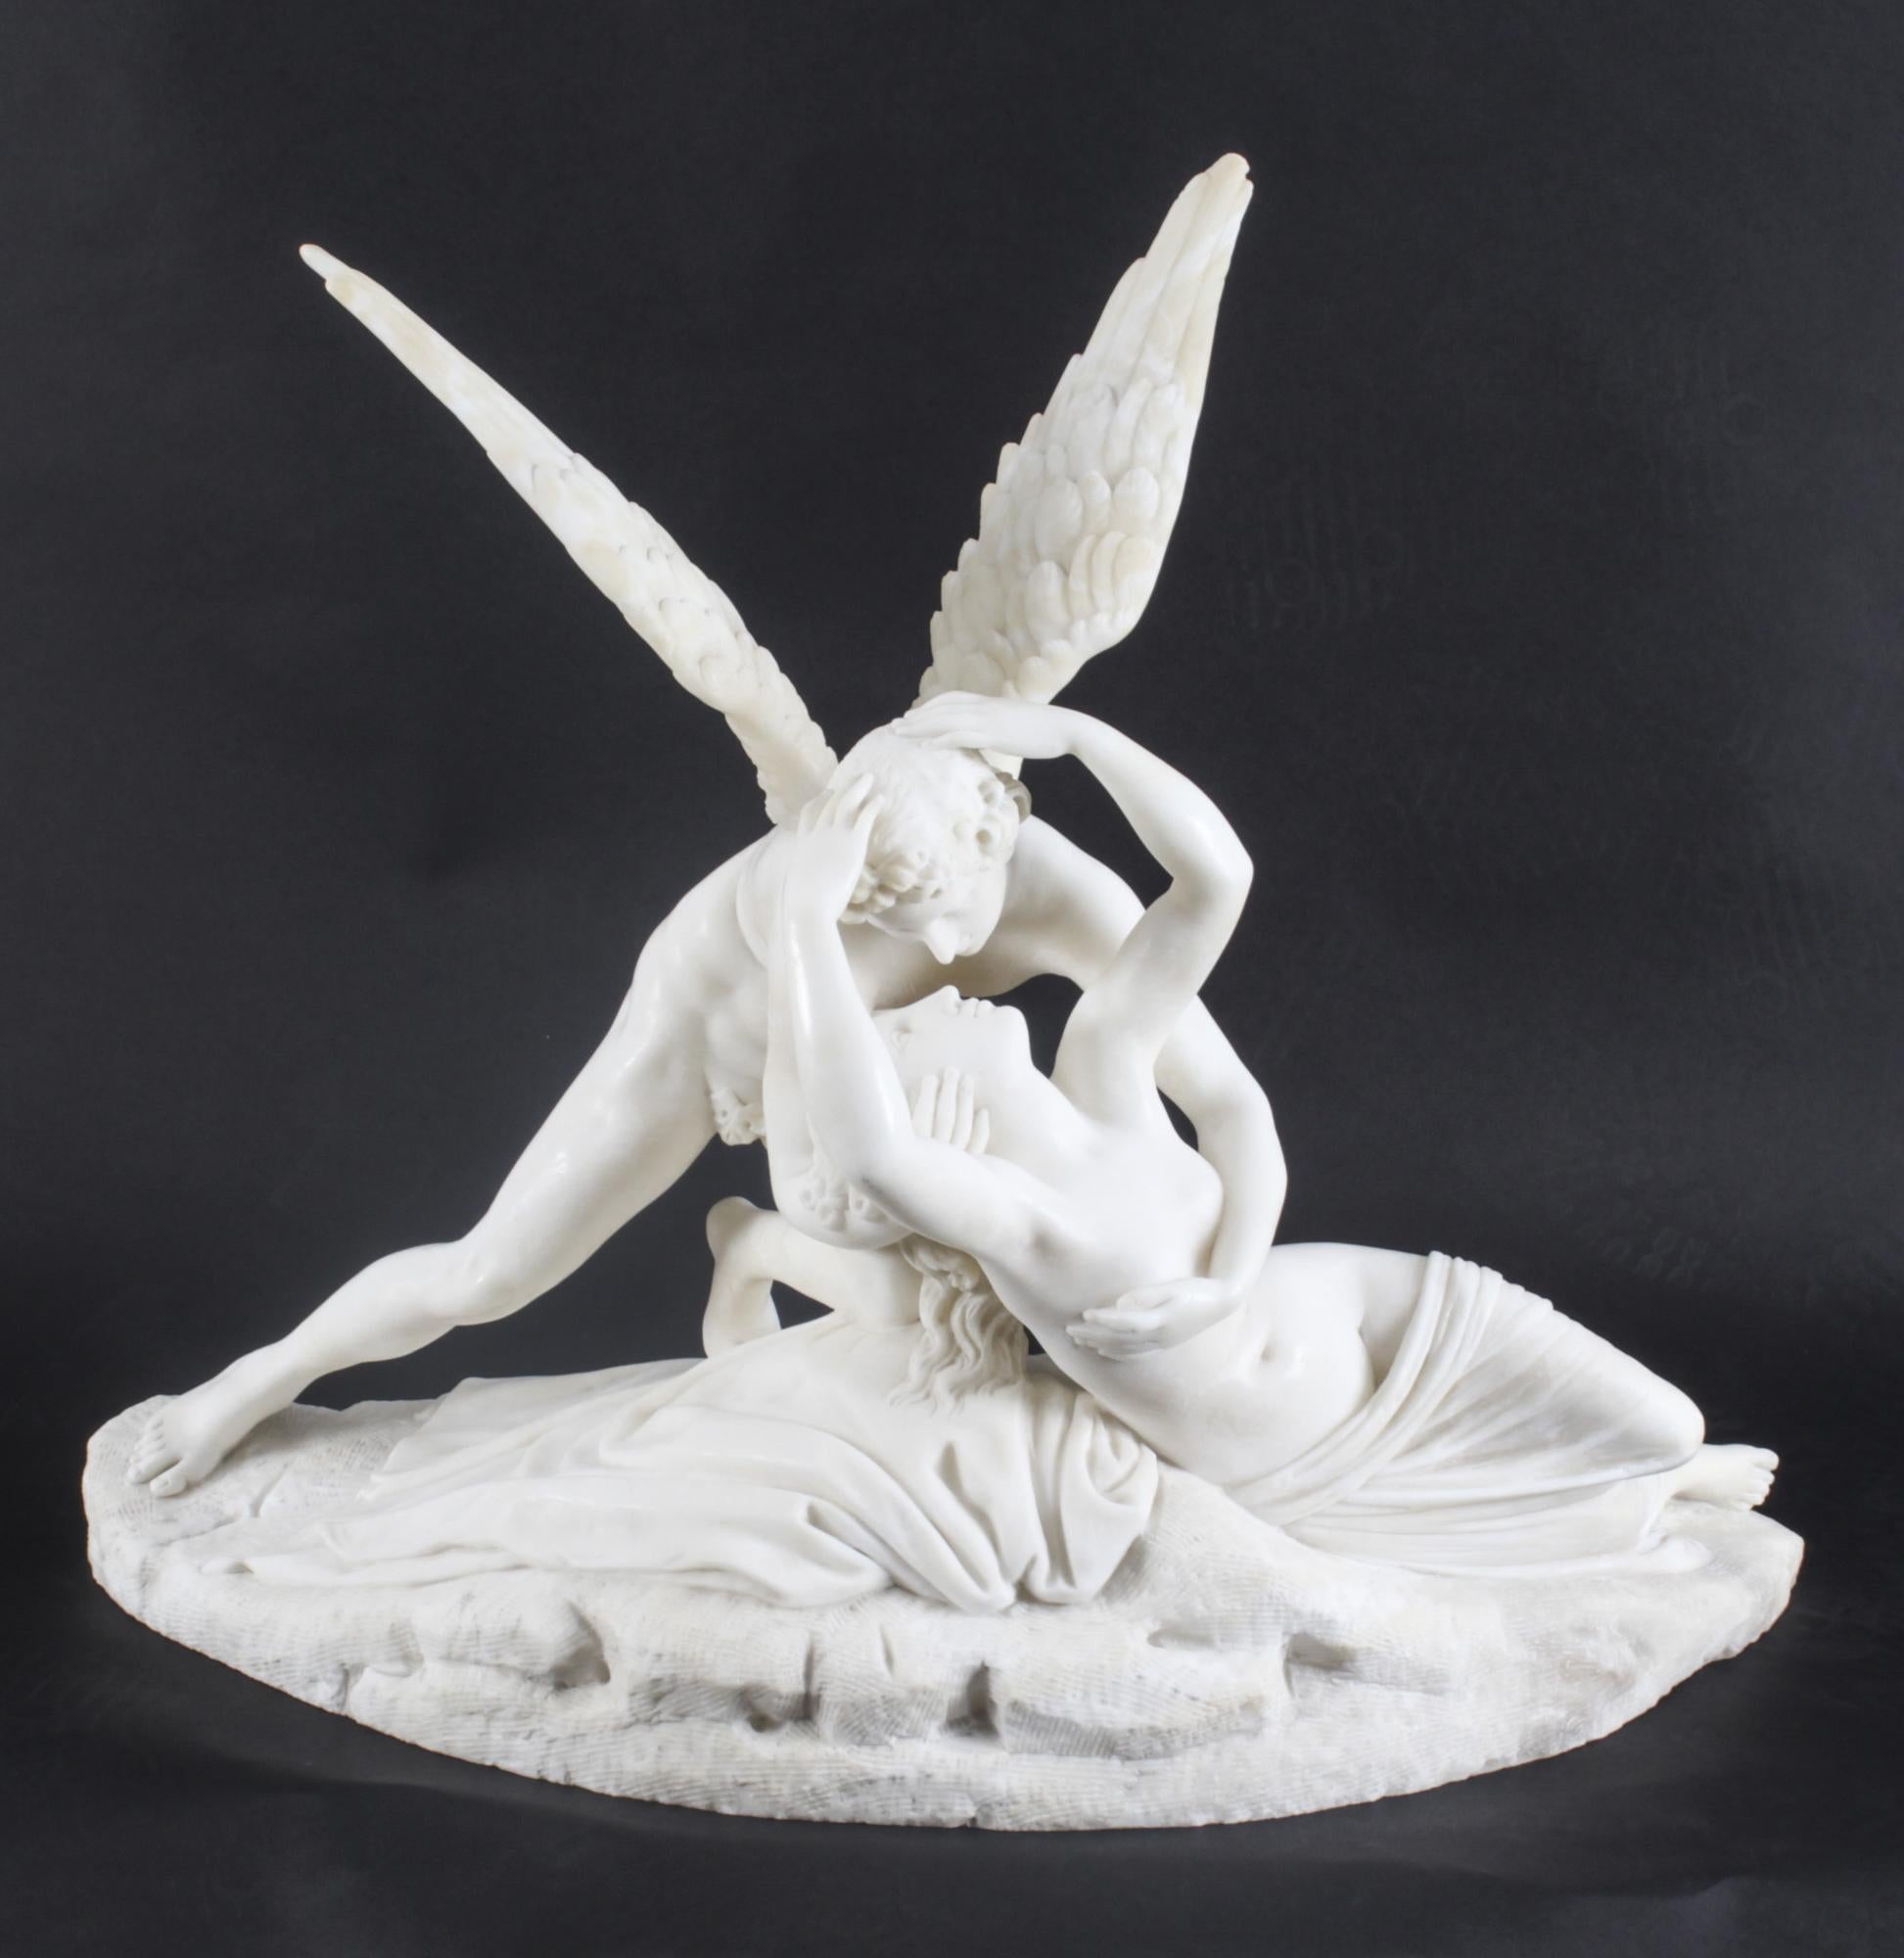 A lovely antique Italian carved marble sculpture, the lovers, after Antonio Canova, circa 1870 in date.

The beautiful sculpture is made from stunning white Carrara marble, and depicts The Kiss of Cupid and Psyche, the winged Cupid is leaning over